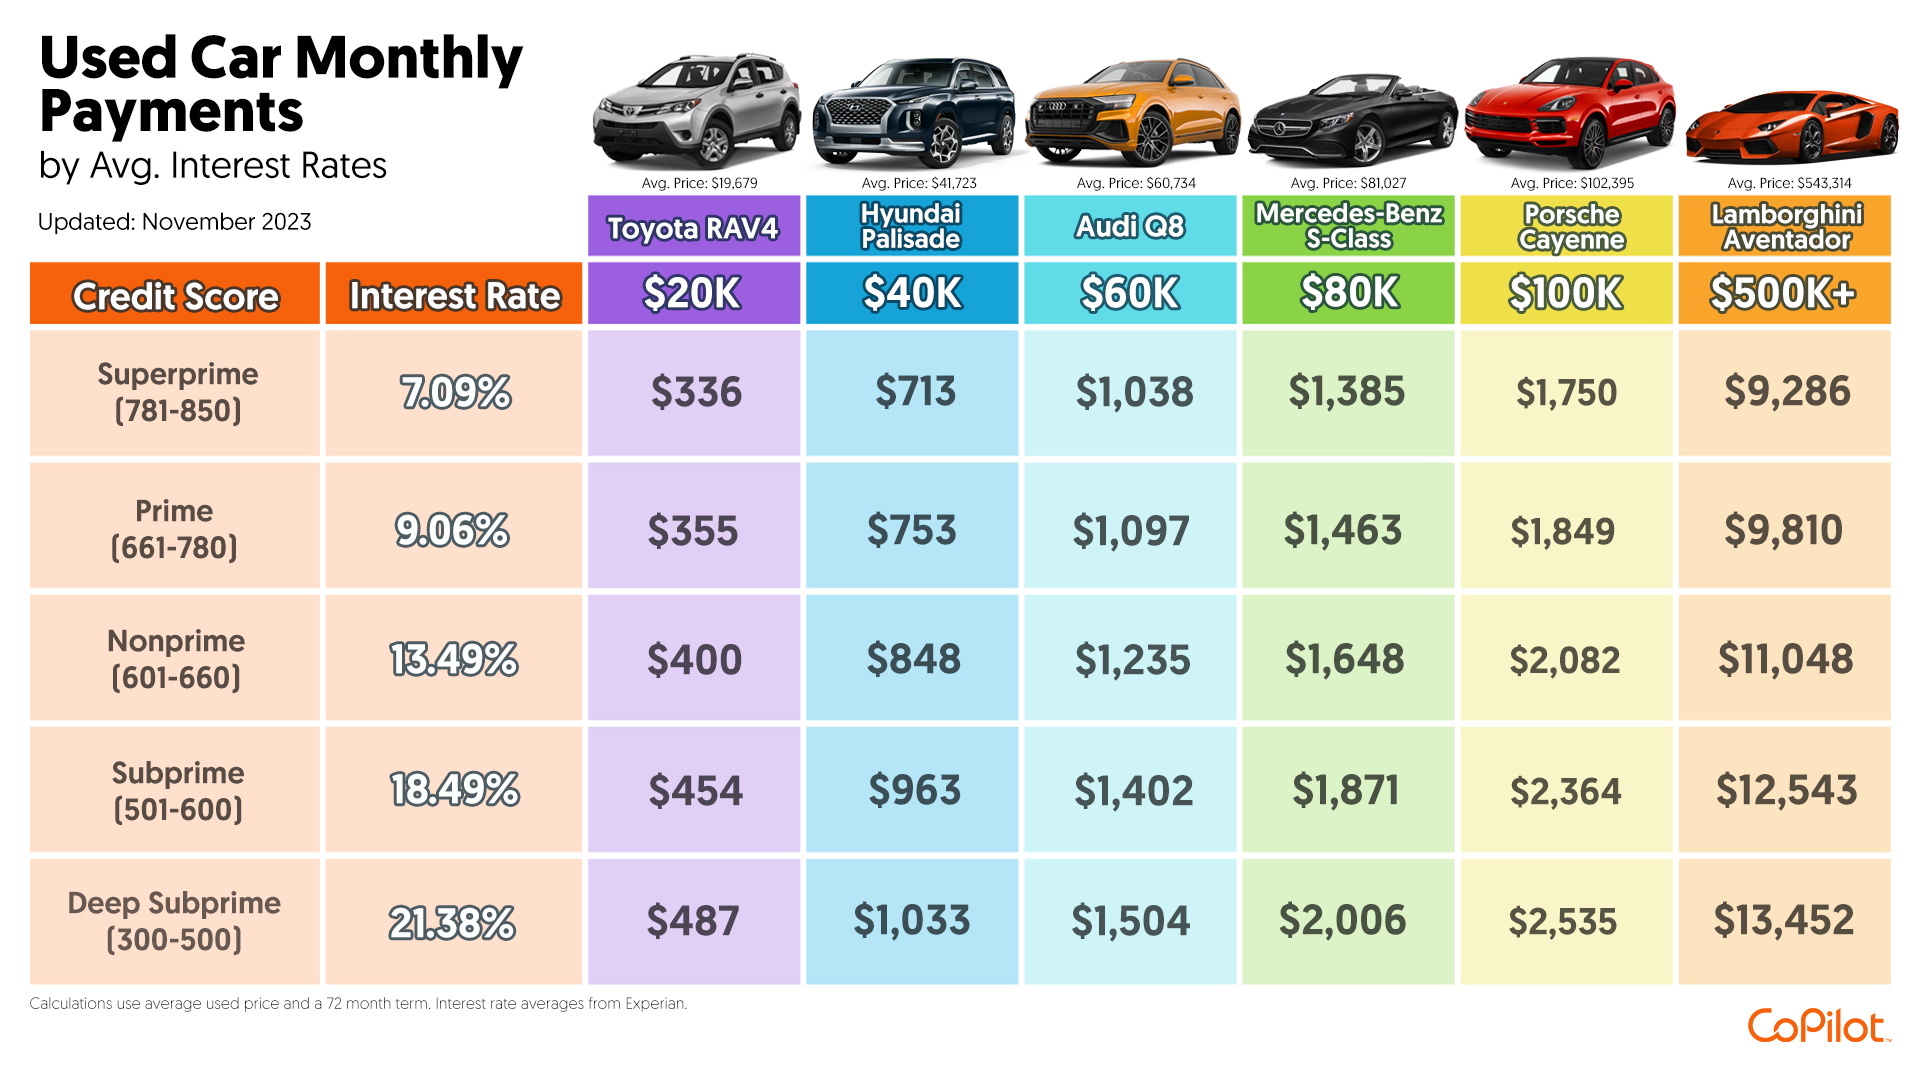 A chart of Used Car Monthly Payments